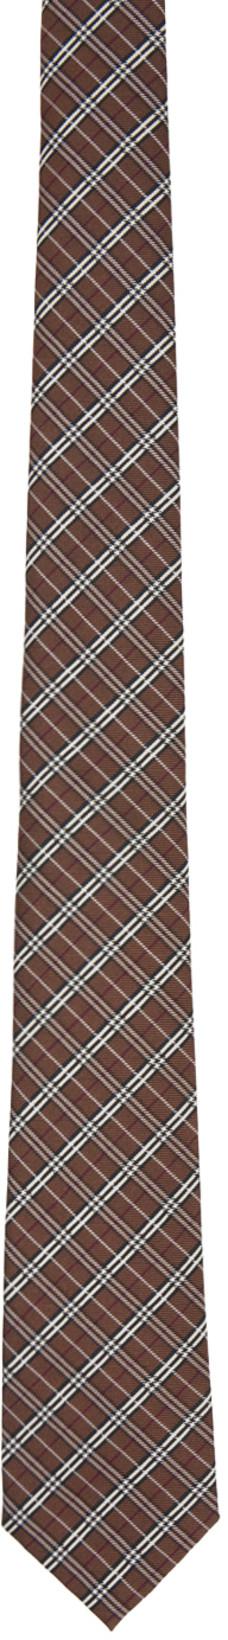 Brown Micro Check Tie by BURBERRY